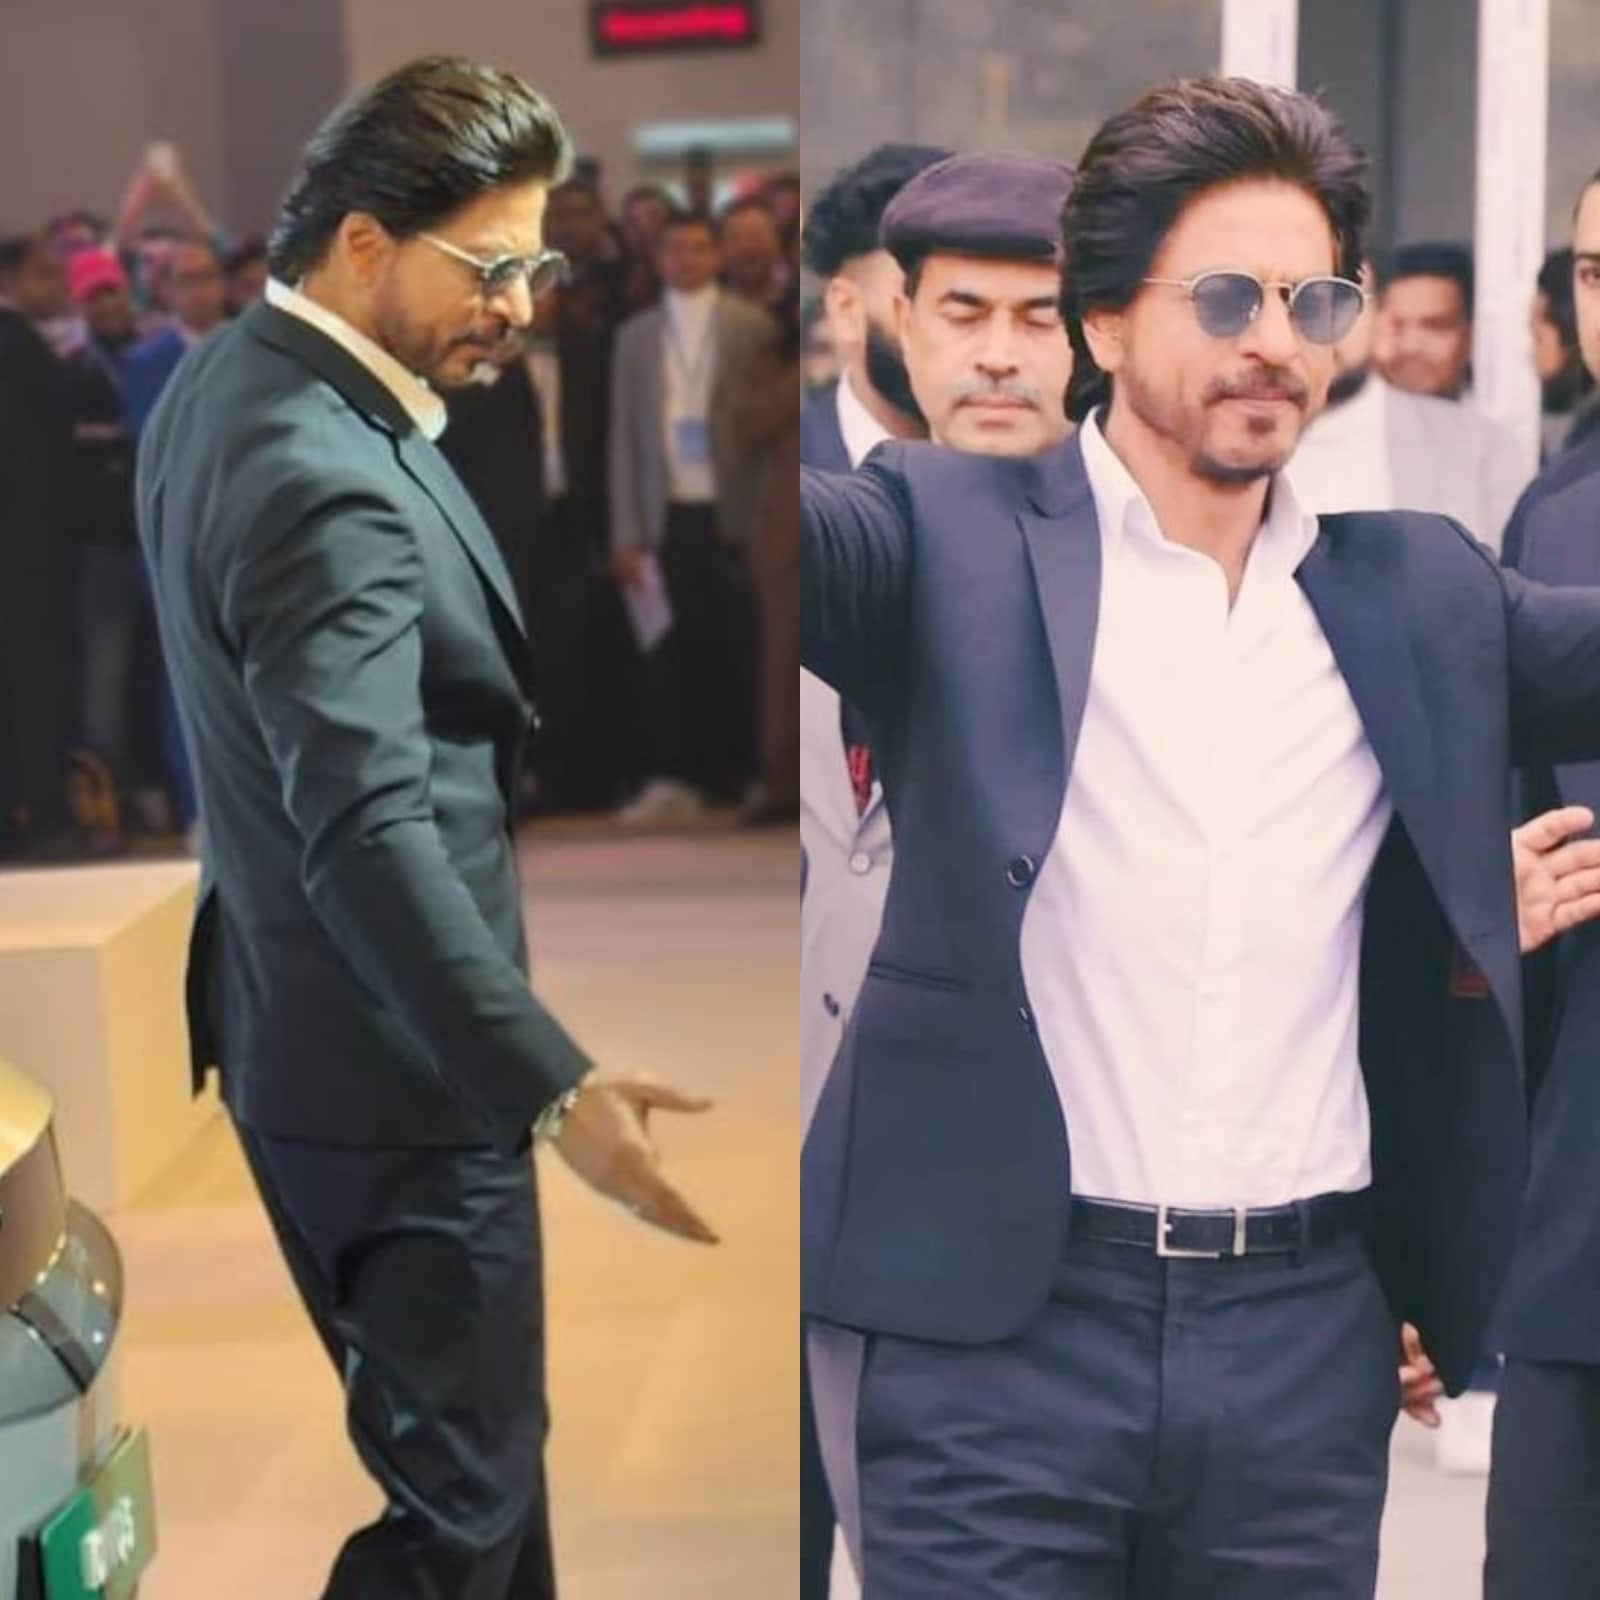 What is your reaction to Shah Rukh Khan calling Ram Charan 'idli' in a  video that went viral? - Quora